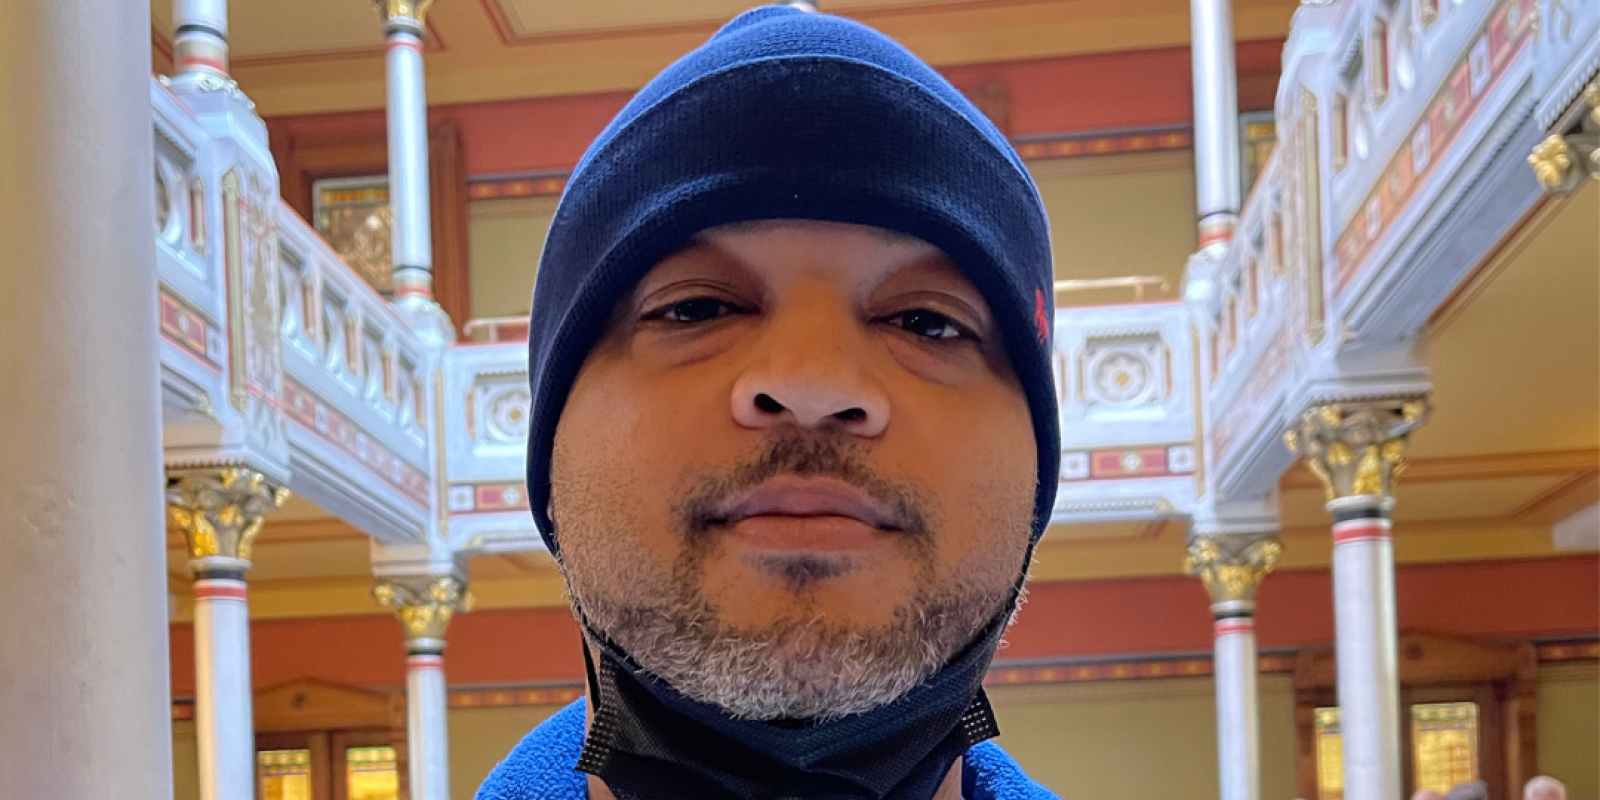 Image description: Tyran Sampson, ACLU-CT Smart Justice leader, stands, facing the camera. He is wearing a blue ACLU of Connecticut Smart Justice zip-up sweatshirt, a navy blue hat, and has a mask pulled down. He looks serious.